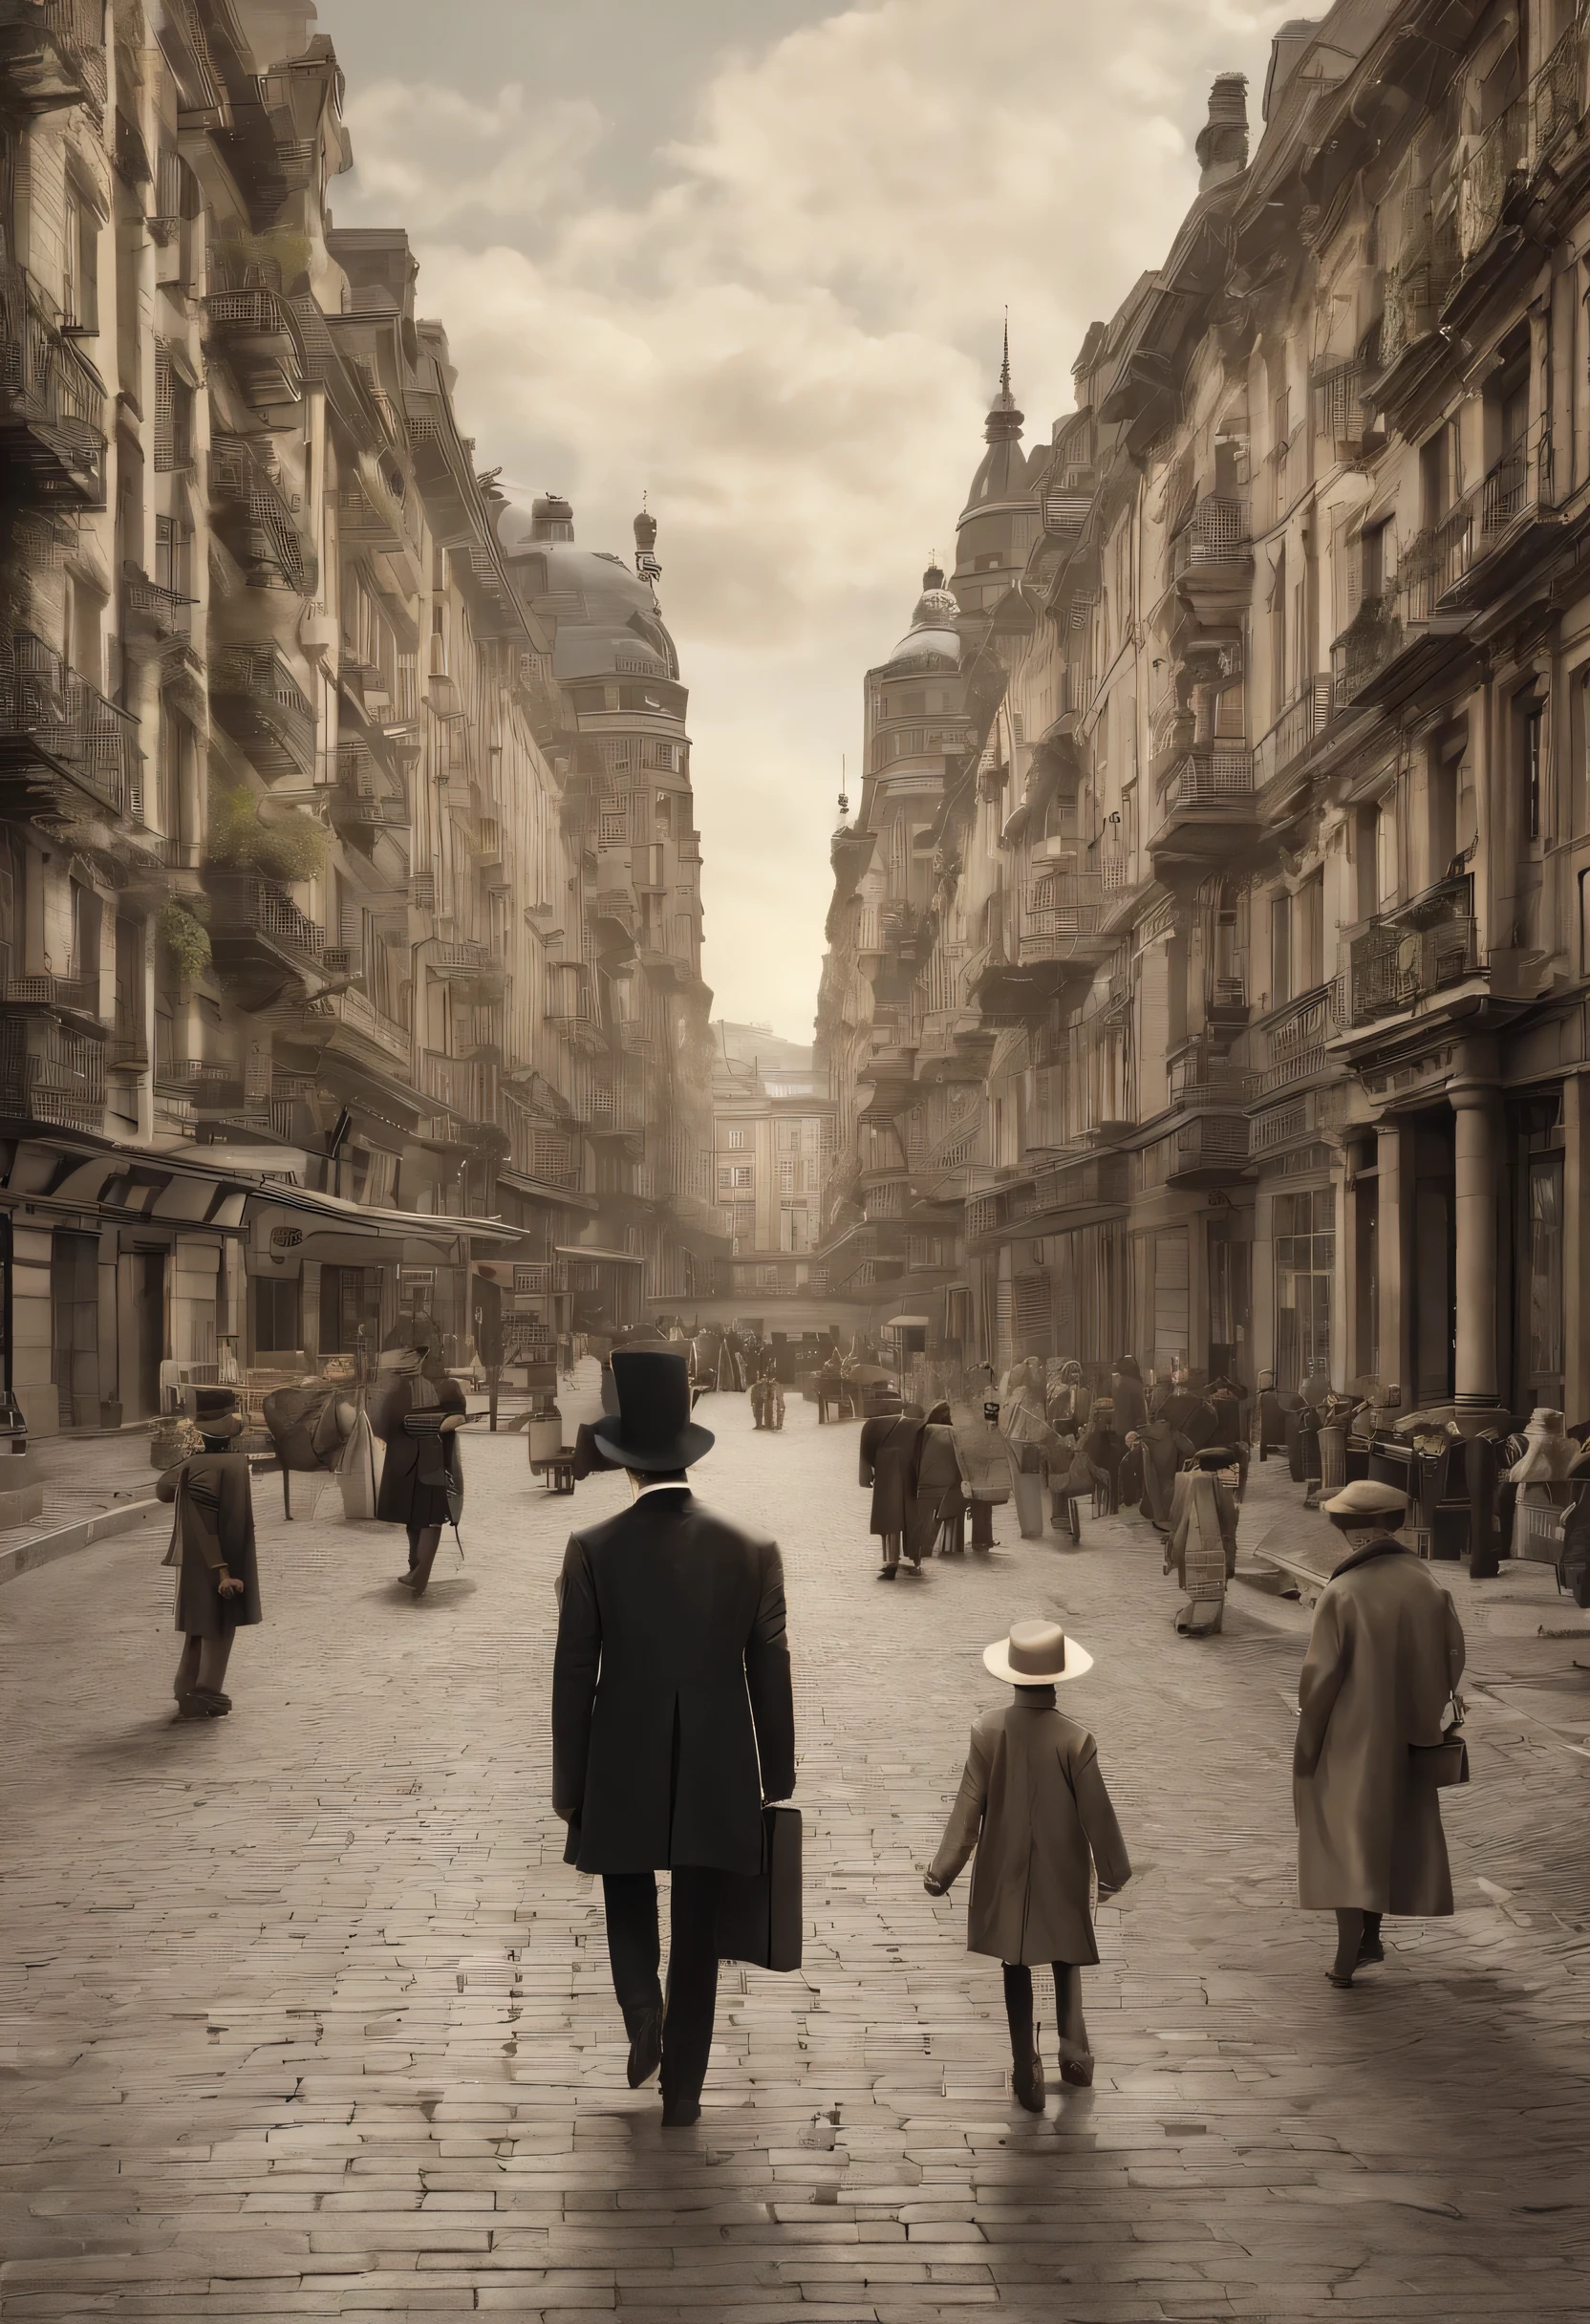 there are many people walking around a large square in a city, by Karl Völker, historical image, by Harry Haenigsen, by Anton Räderscheidt, by Werner Gutzeit, barcelona in 1 9 1 8, by Emil Lindenfeld, inspired by Tilo Baumgärtel, old photo width 768